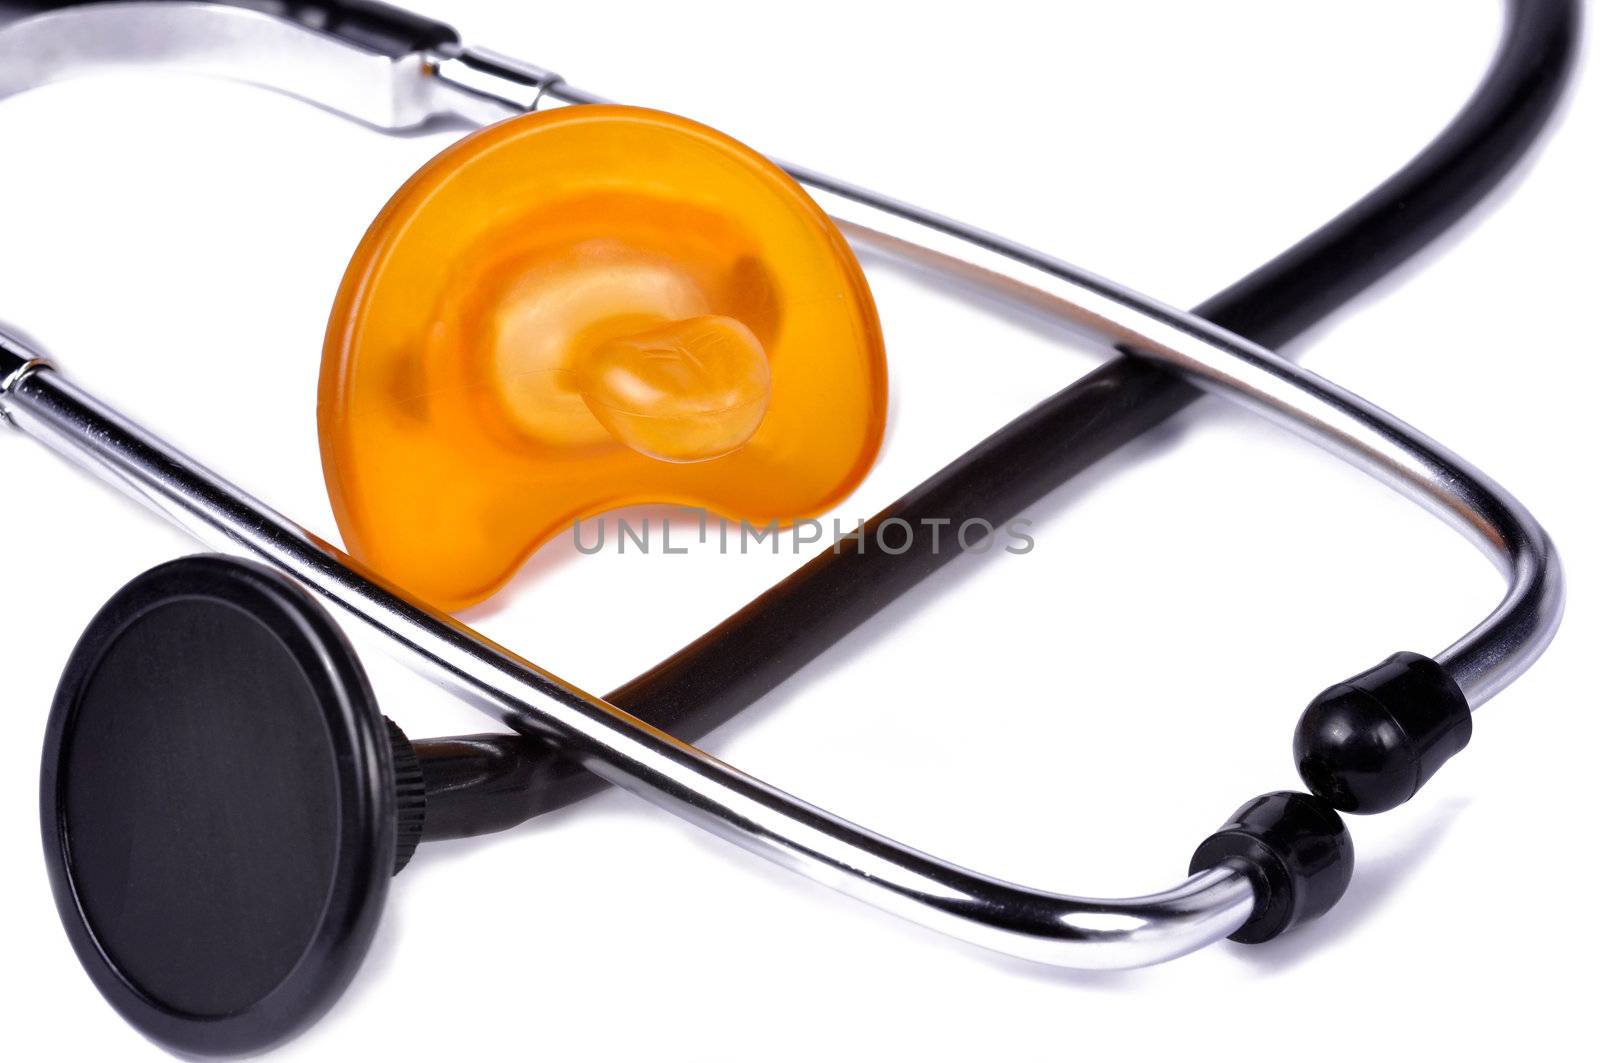 Pacifier and stethoscope. Conceptual image to ilustrate Pediatrics and baby health.